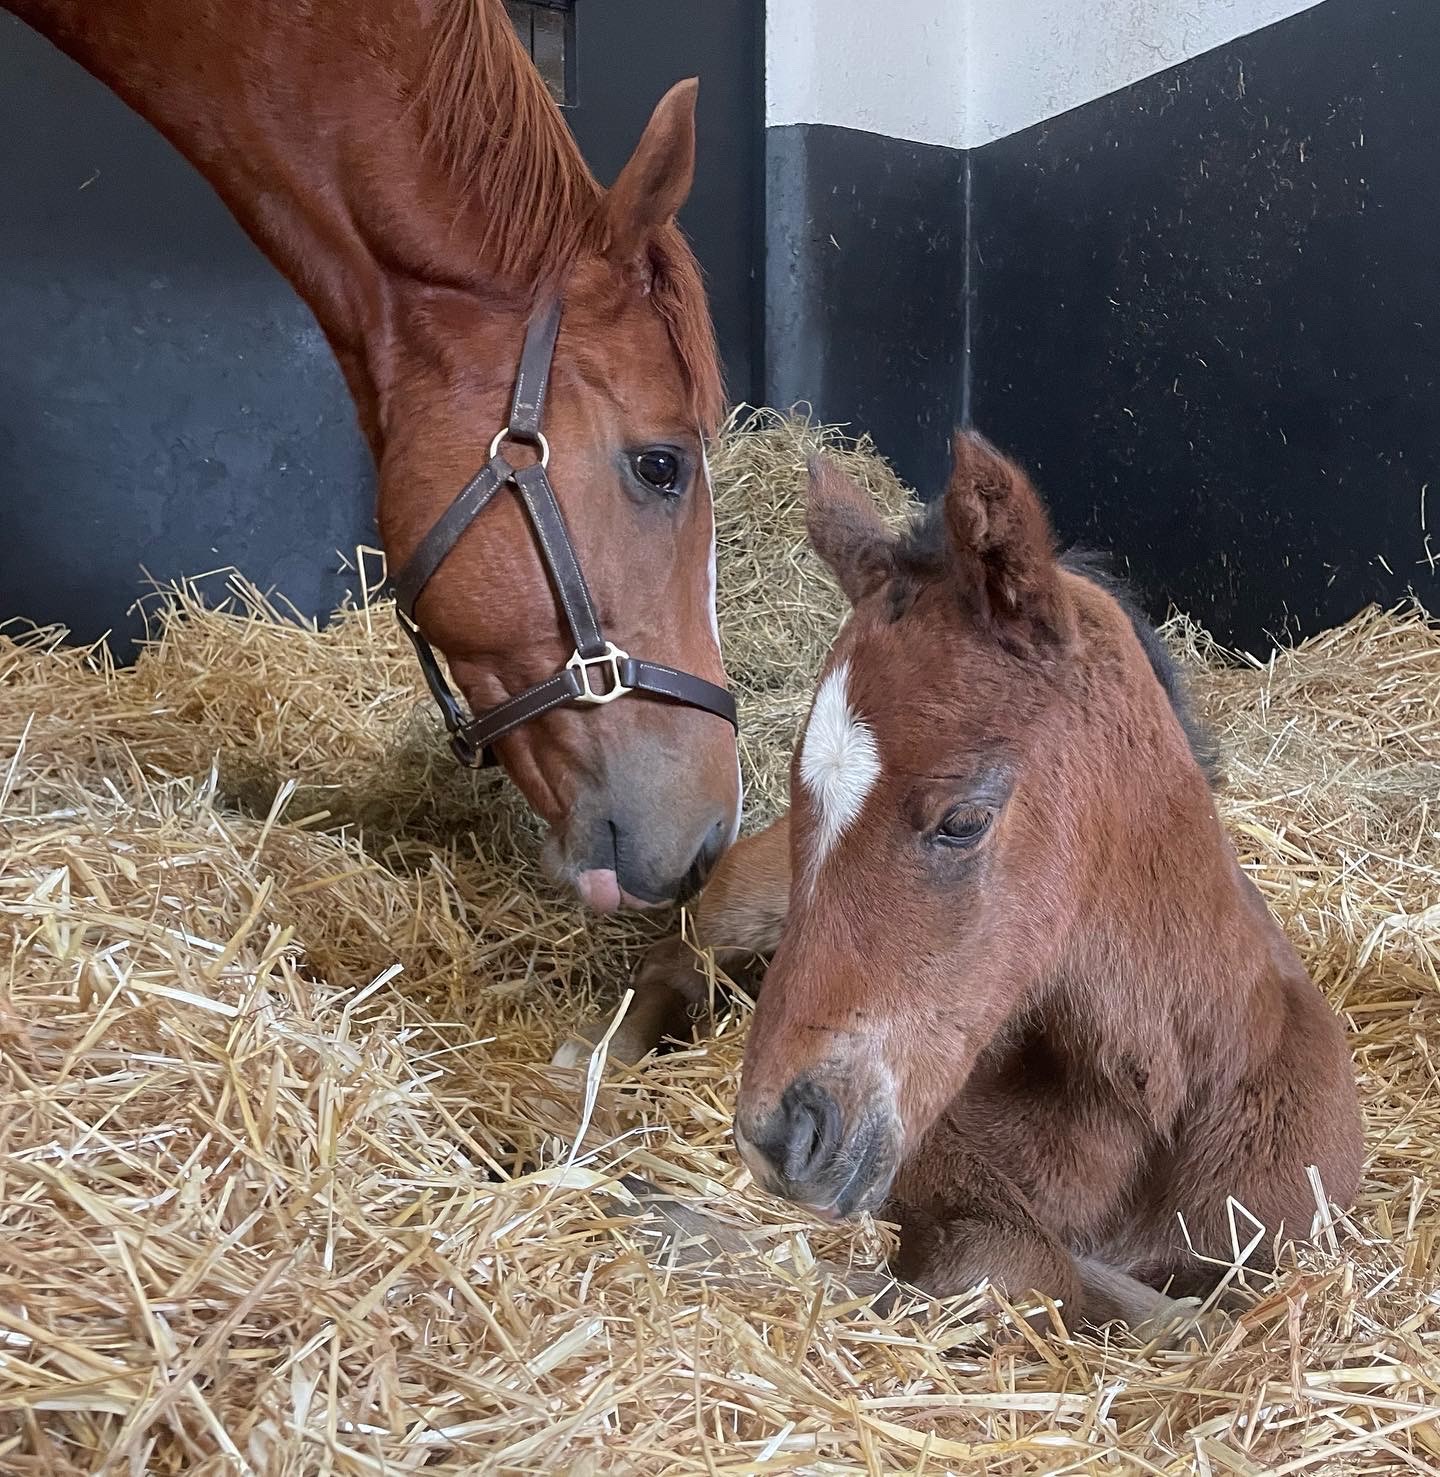 The first foals arrive at the Irish National Stud